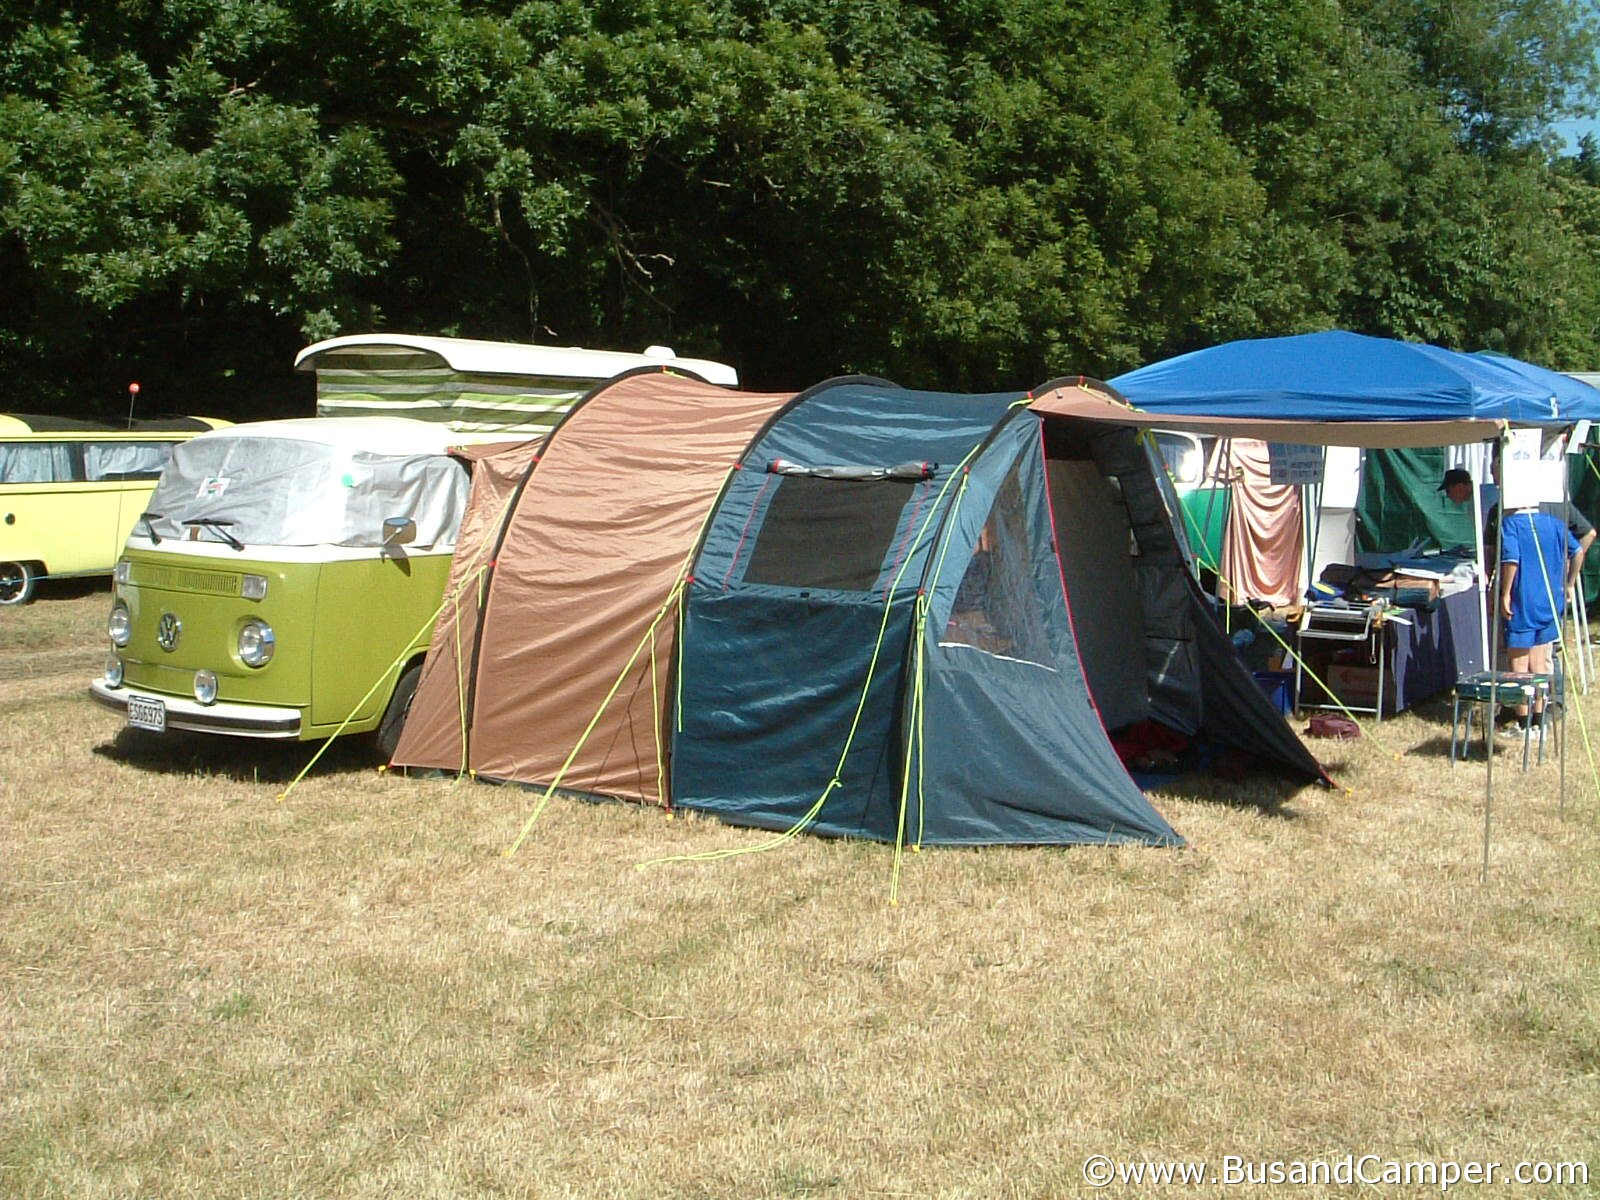 Camper and tent